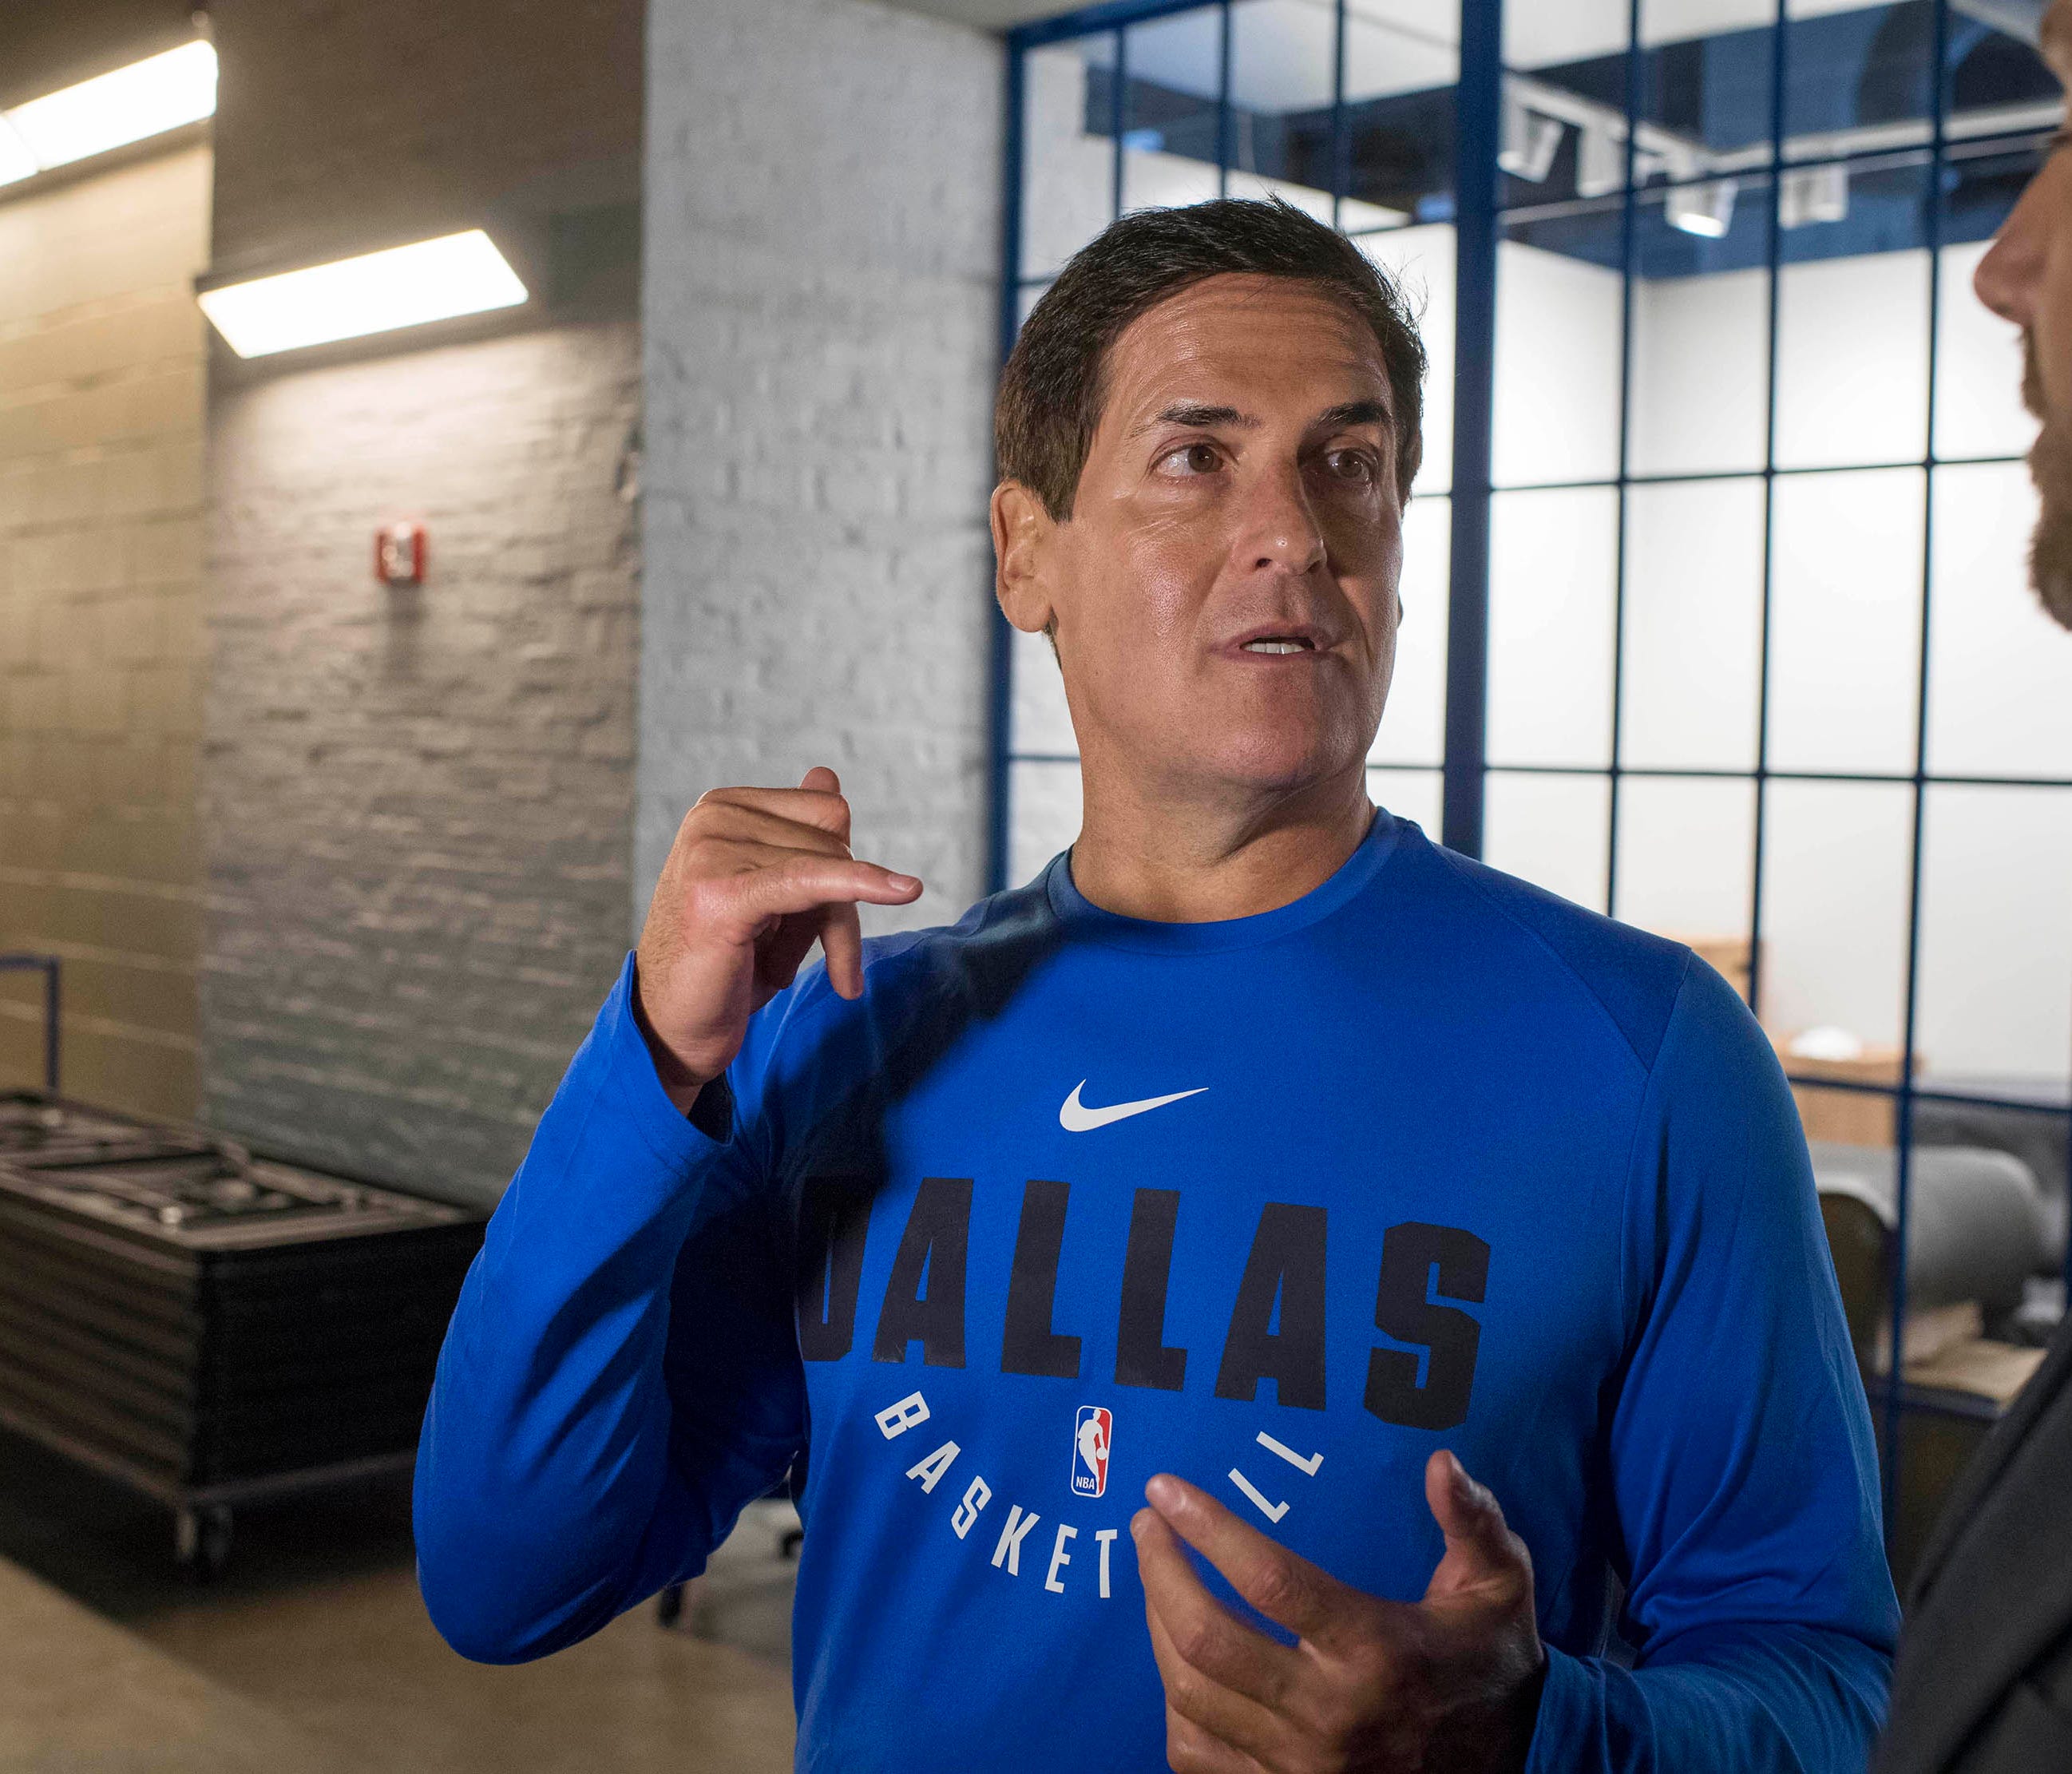 Sep 25, 2017; Dallas, TX, USA;  Dallas Mavericks owner Mark Cuban is interviewed during the Mavericks media day at the American Airlines Center. Mandatory Credit: Jerome Miron-USA TODAY Sports ORG XMIT: USATSI-363451 ORIG FILE ID:  20170925_sal_an4_7